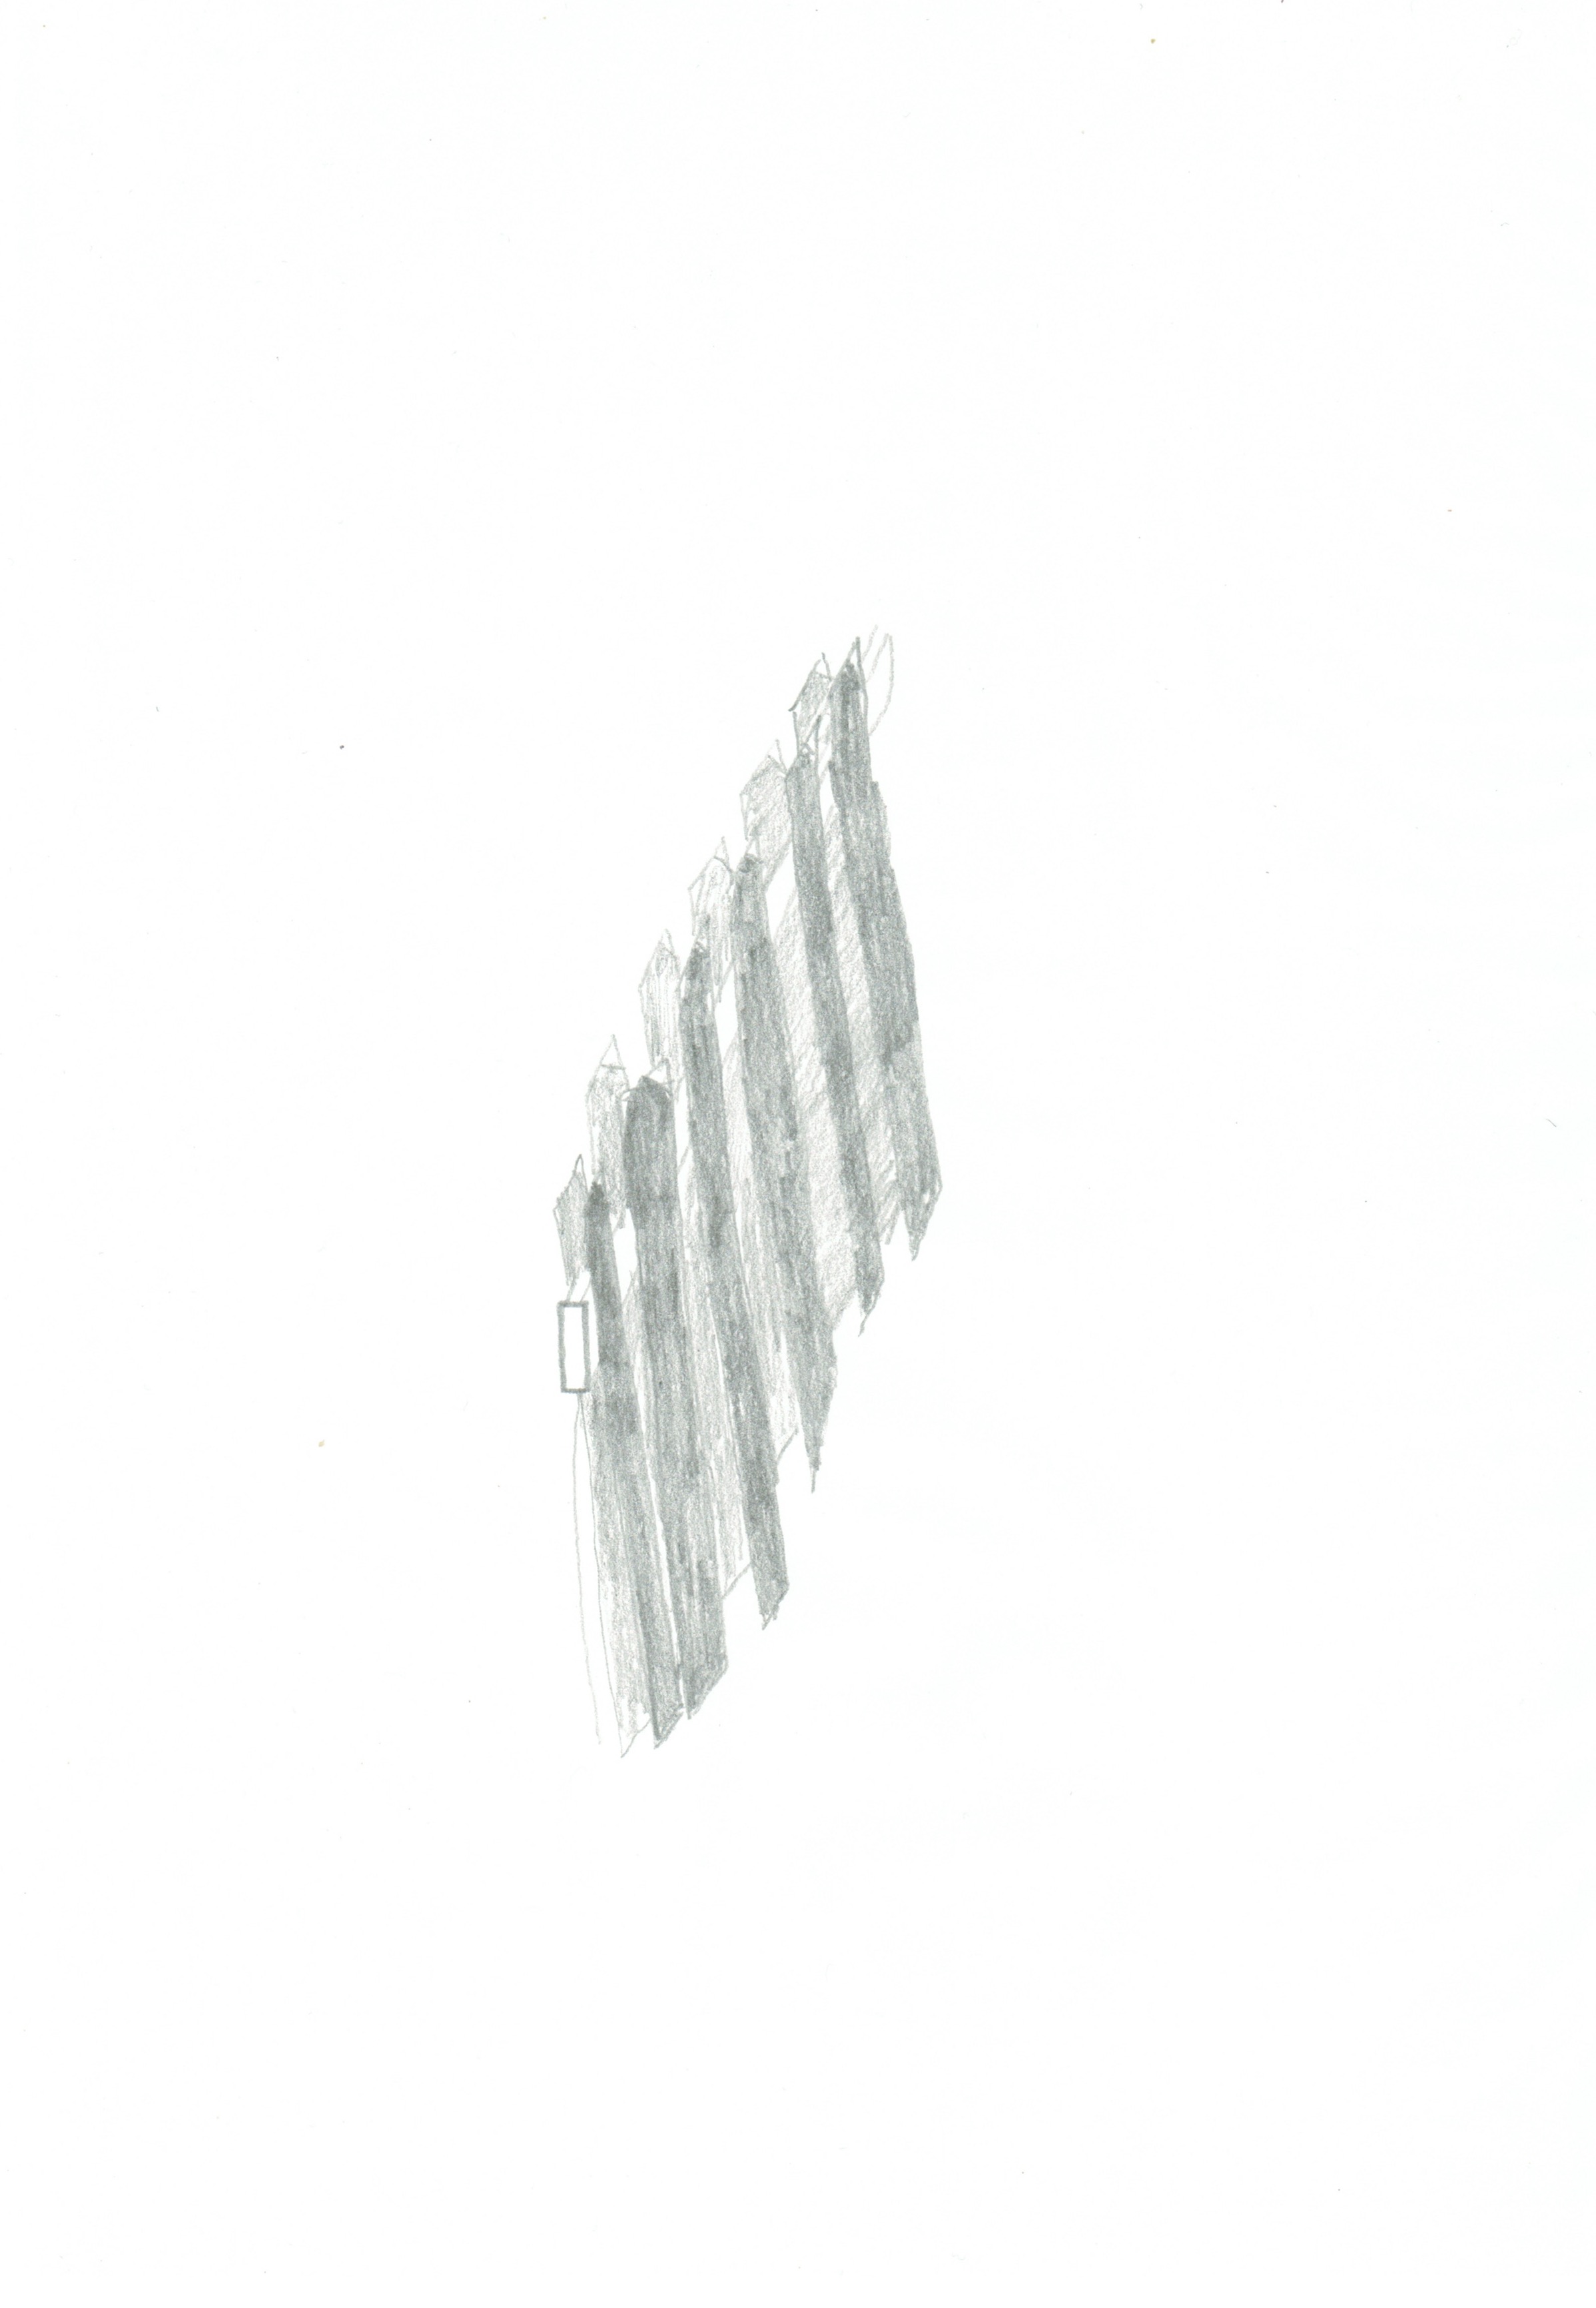 axonometric pencil drawing of a fence